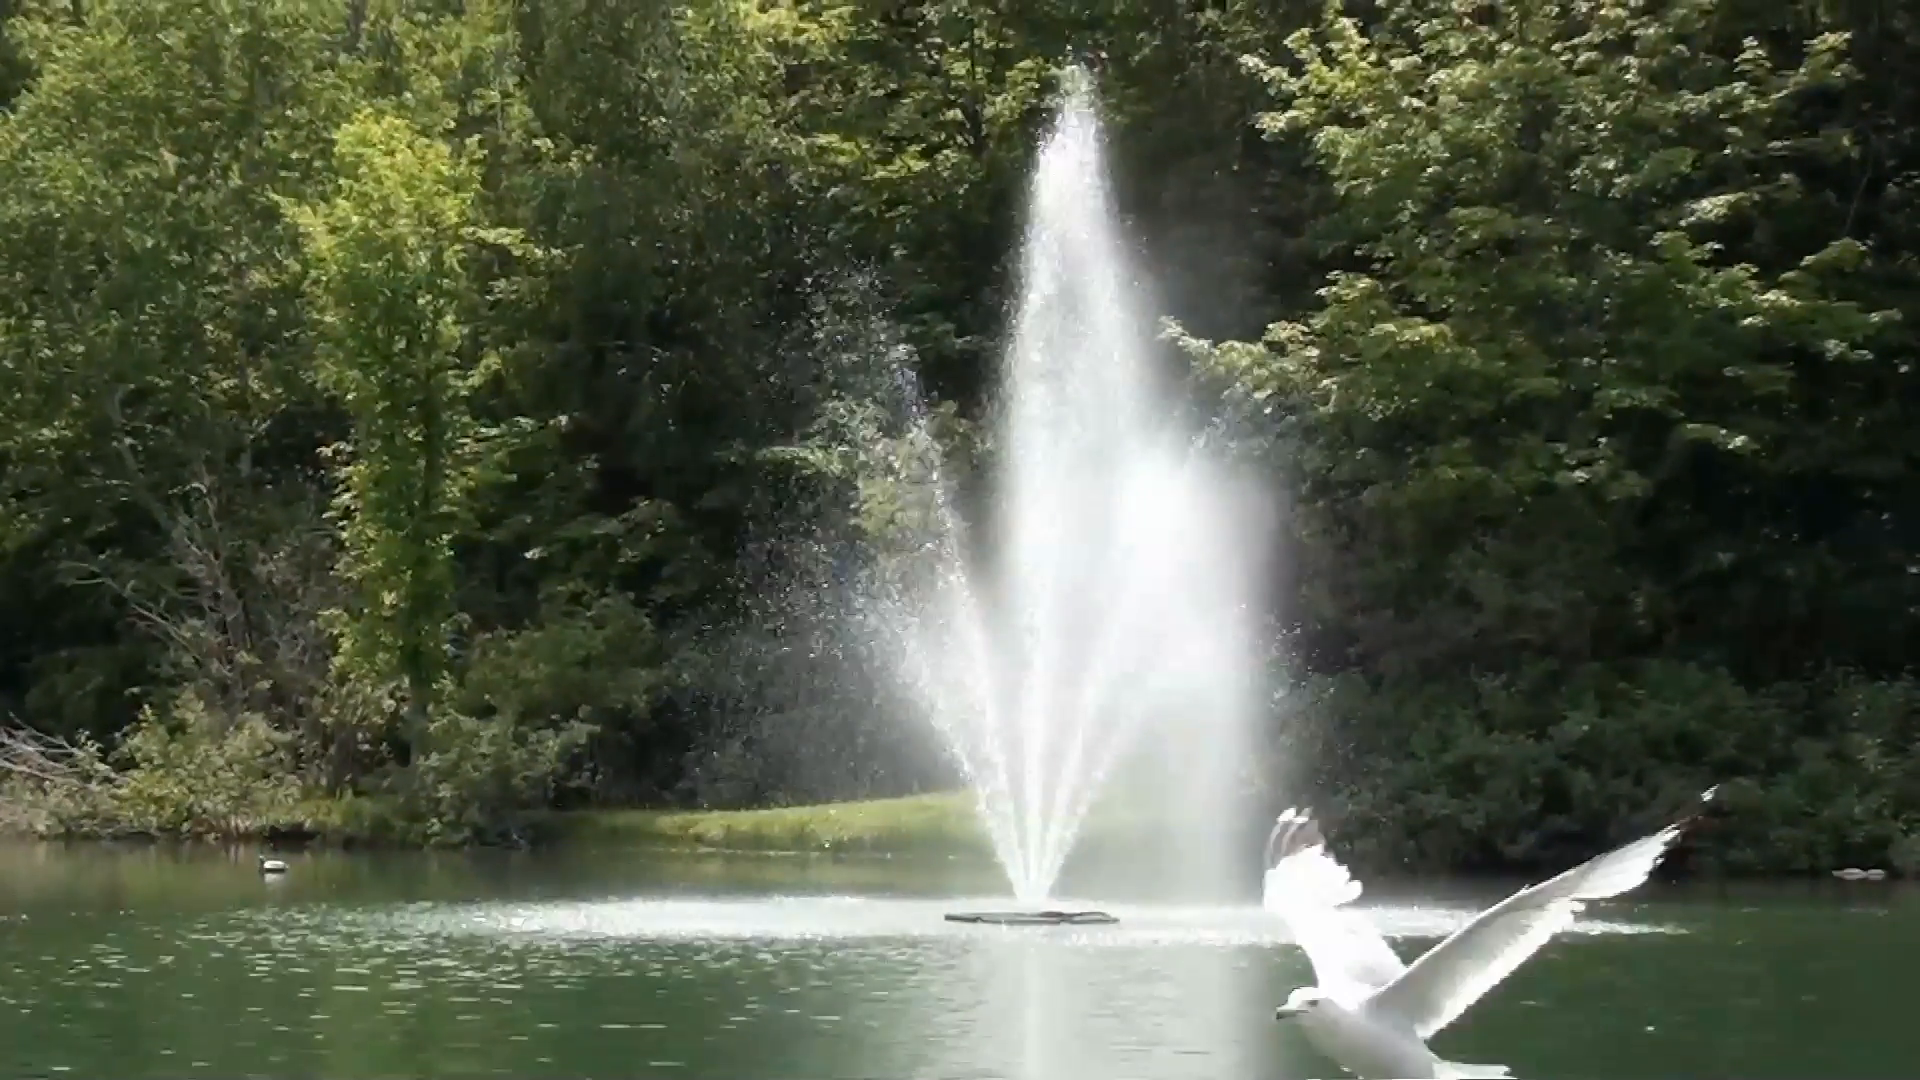 White Scenic Birds are flying in slow motion near a water fountain ...